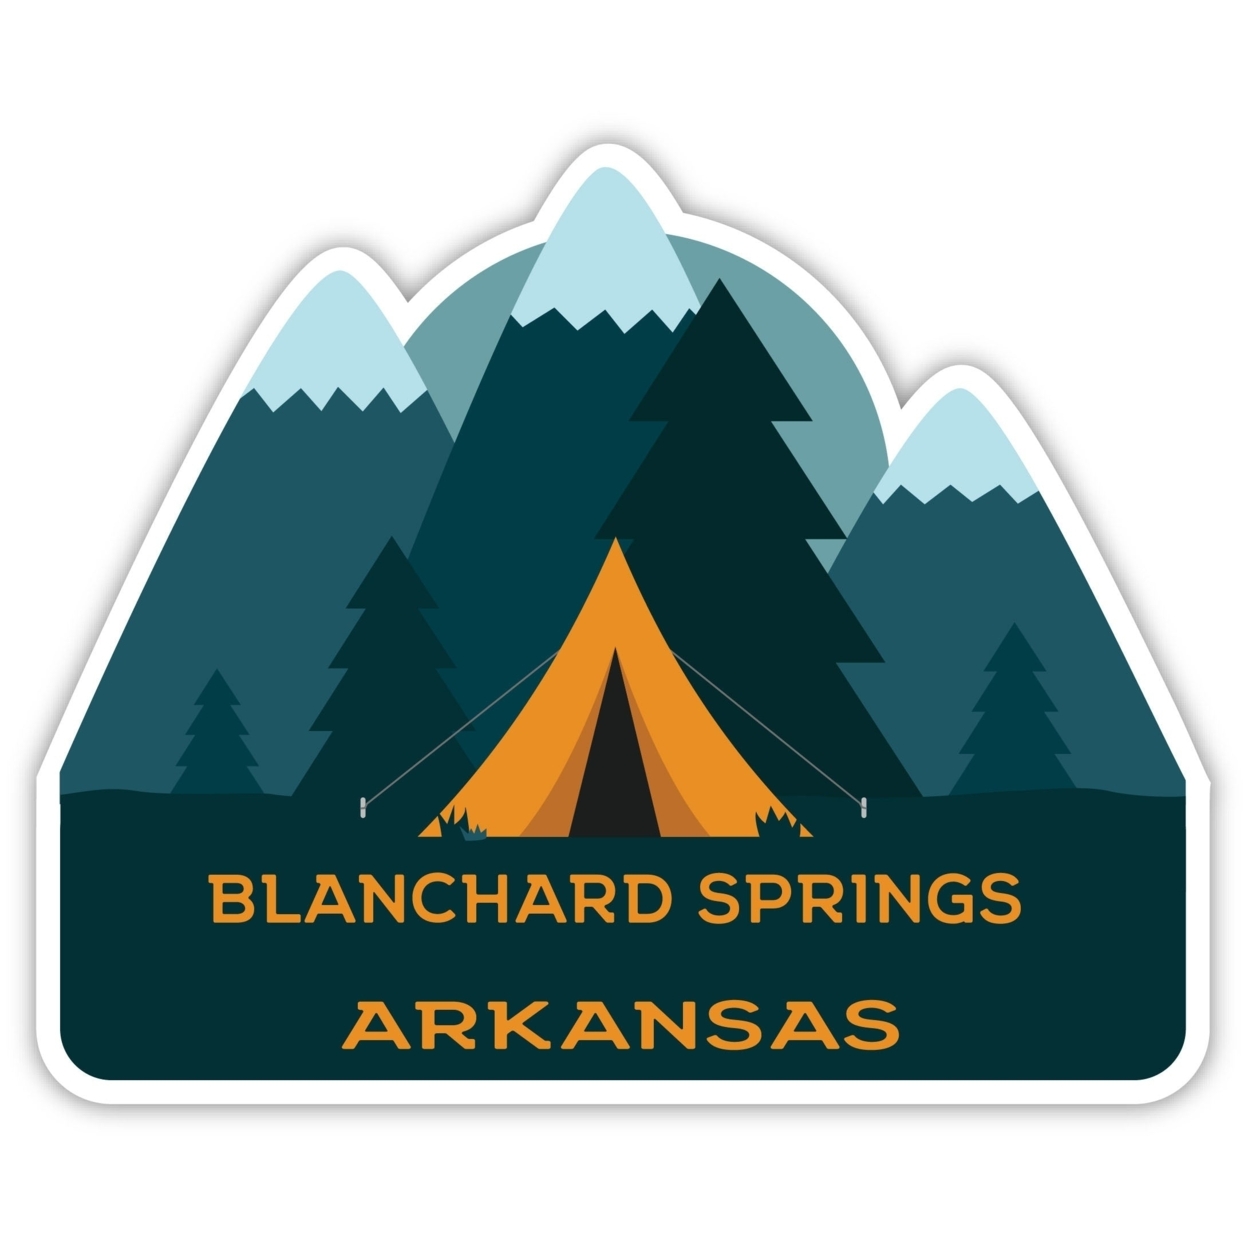 Blanchard Springs Arkansas Souvenir Decorative Stickers (Choose Theme And Size) - 4-Pack, 8-Inch, Camp Life